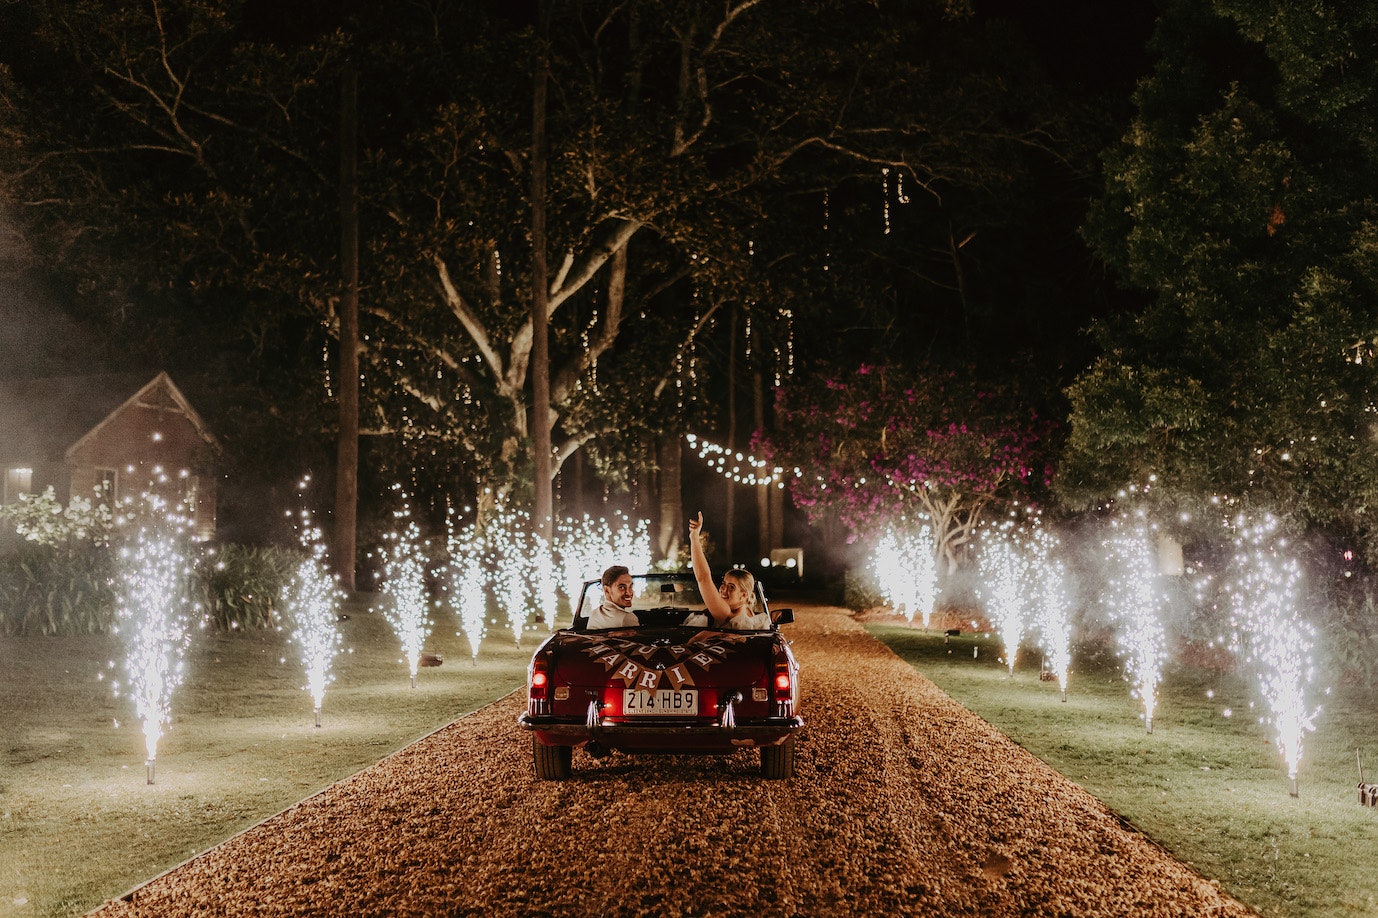 Bride and groom driving off in car with fireworks